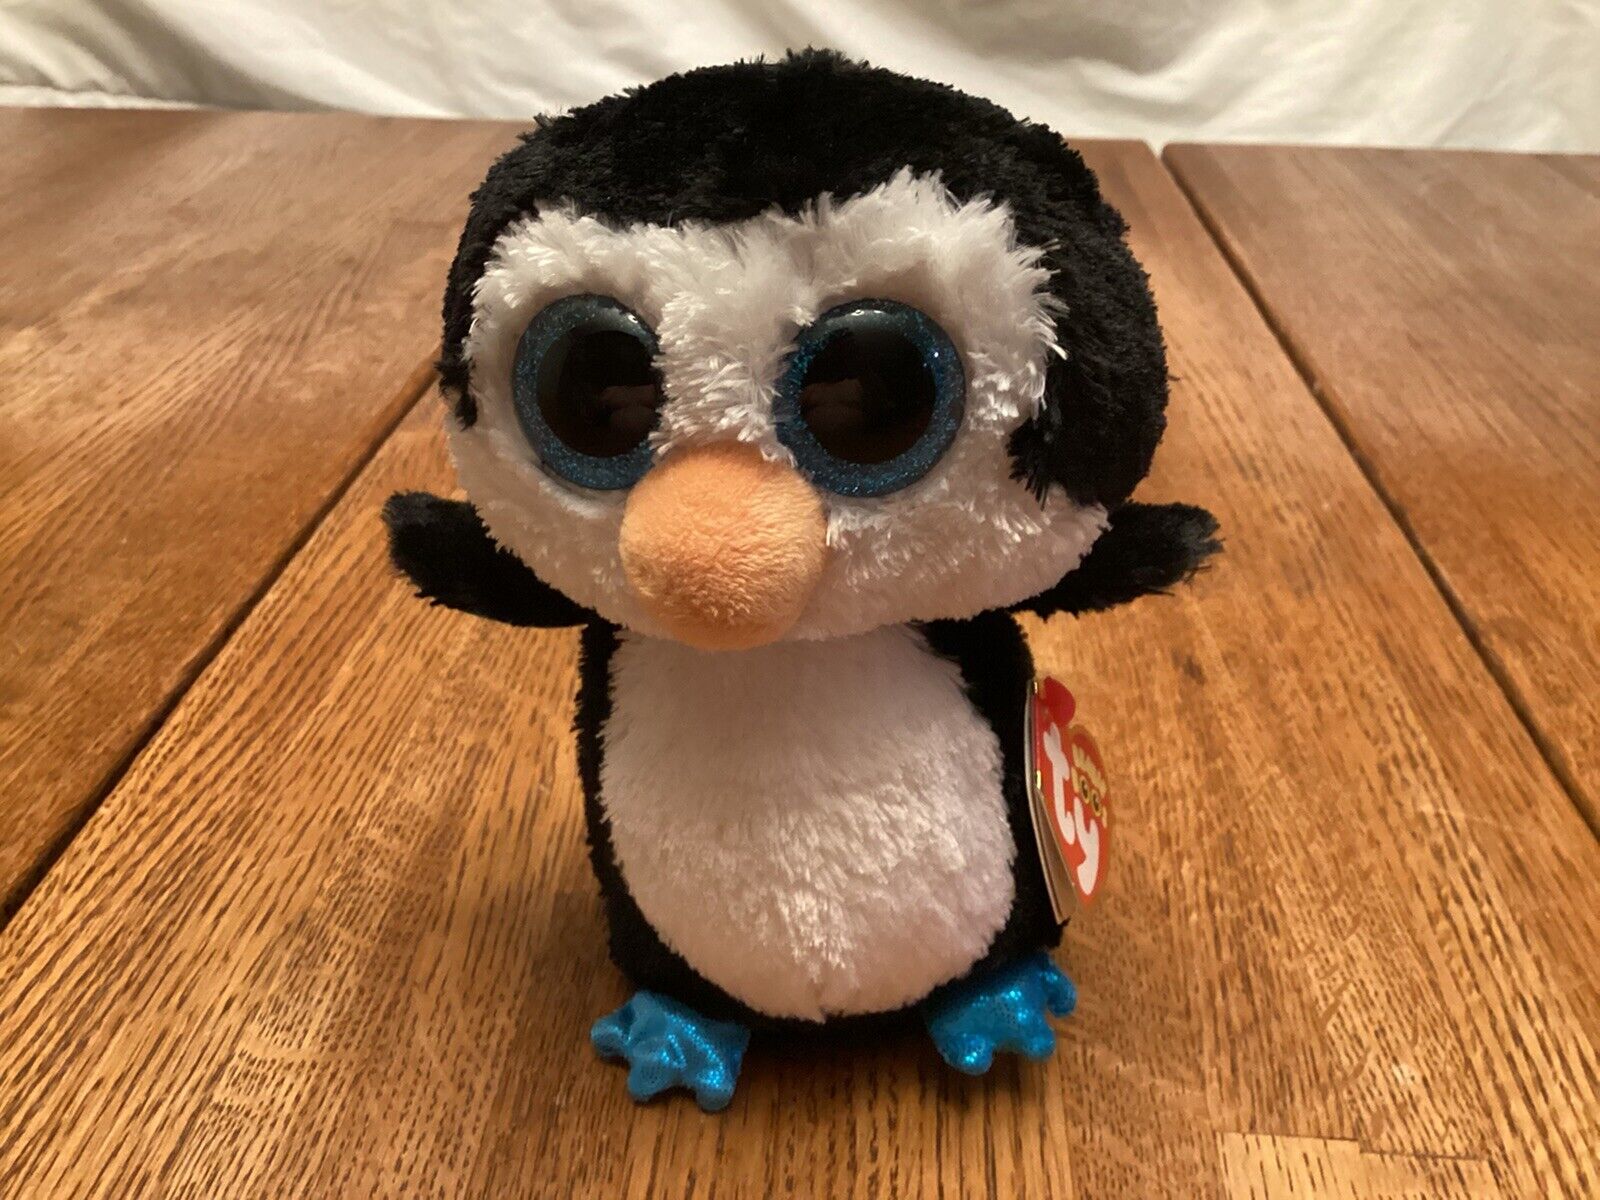 Ty Beanie Boos 2015 Waddles Blue 6" Plush Penguin Stuffed Animal With Tags New